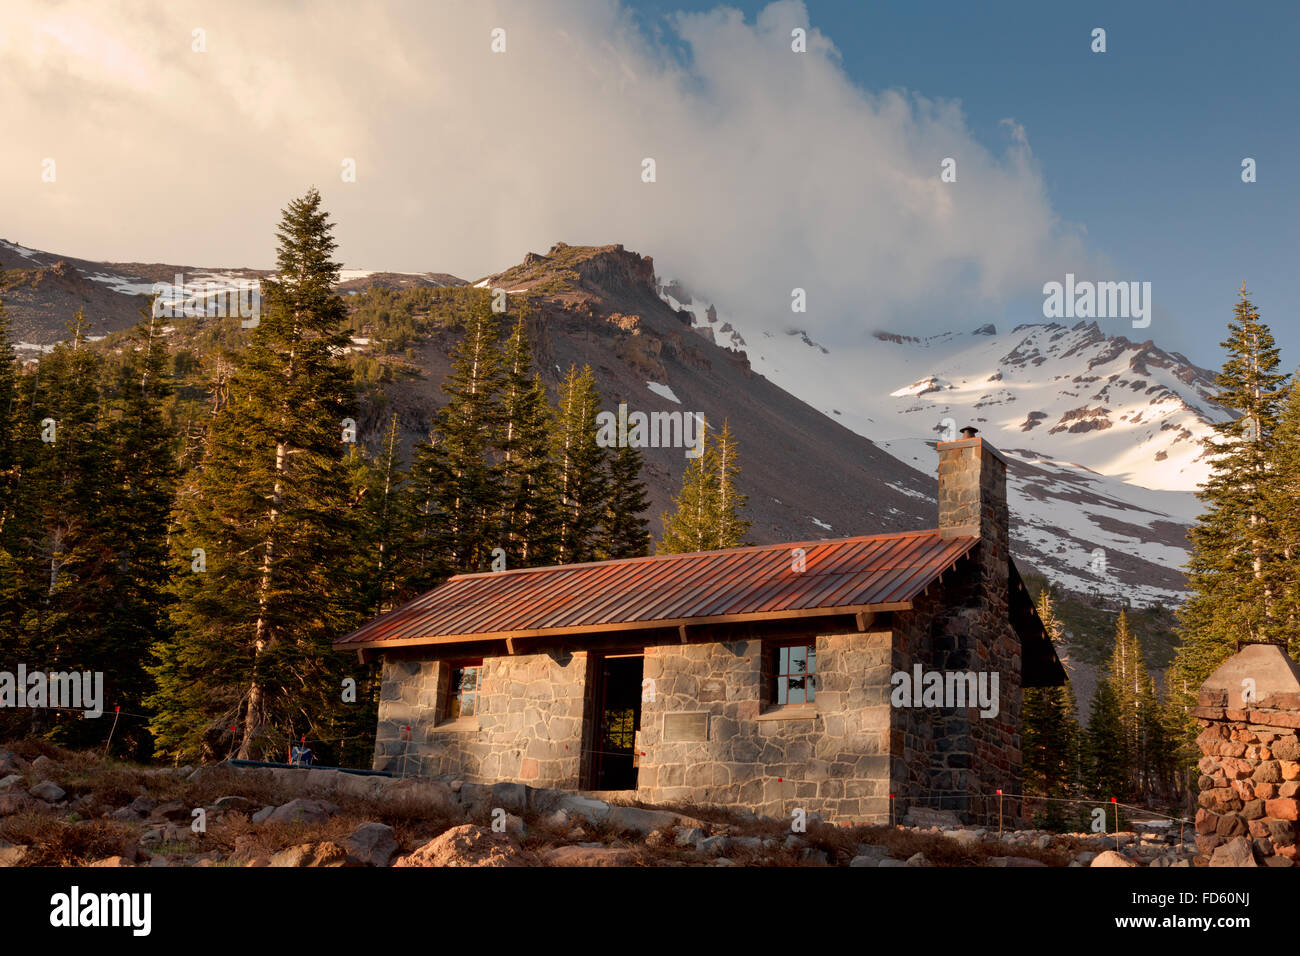 CALIFORNIA - Evening at the Sierra Club shelter cabin at Horse Camp below the main Mount Shasta climbing route; Avalanche Gulch. Stock Photo